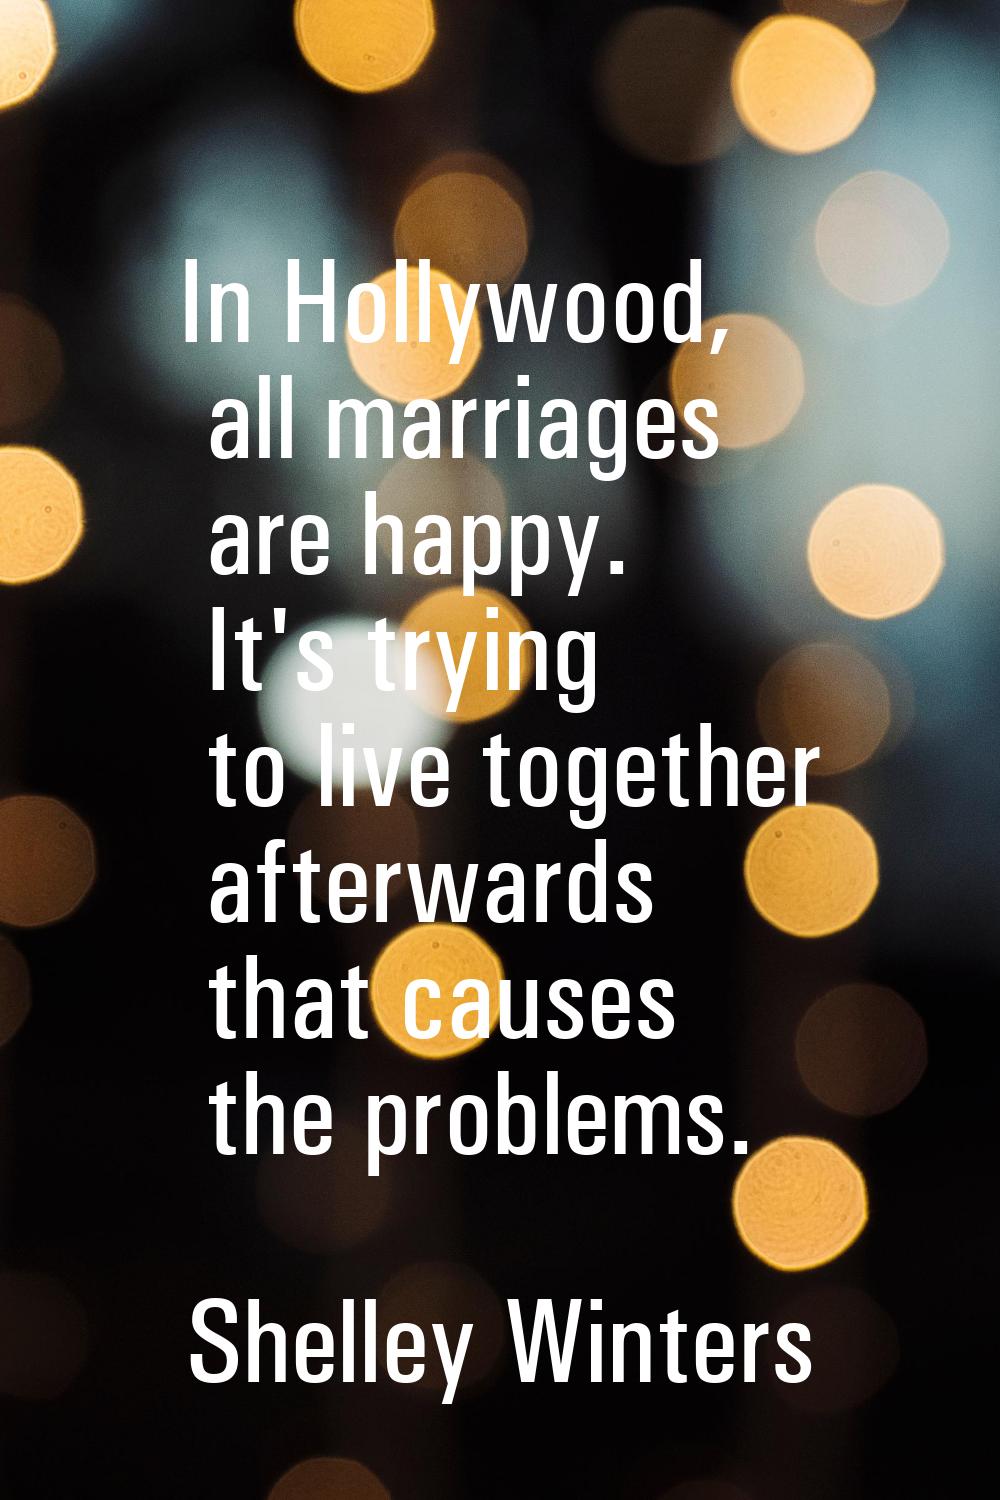 In Hollywood, all marriages are happy. It's trying to live together afterwards that causes the prob